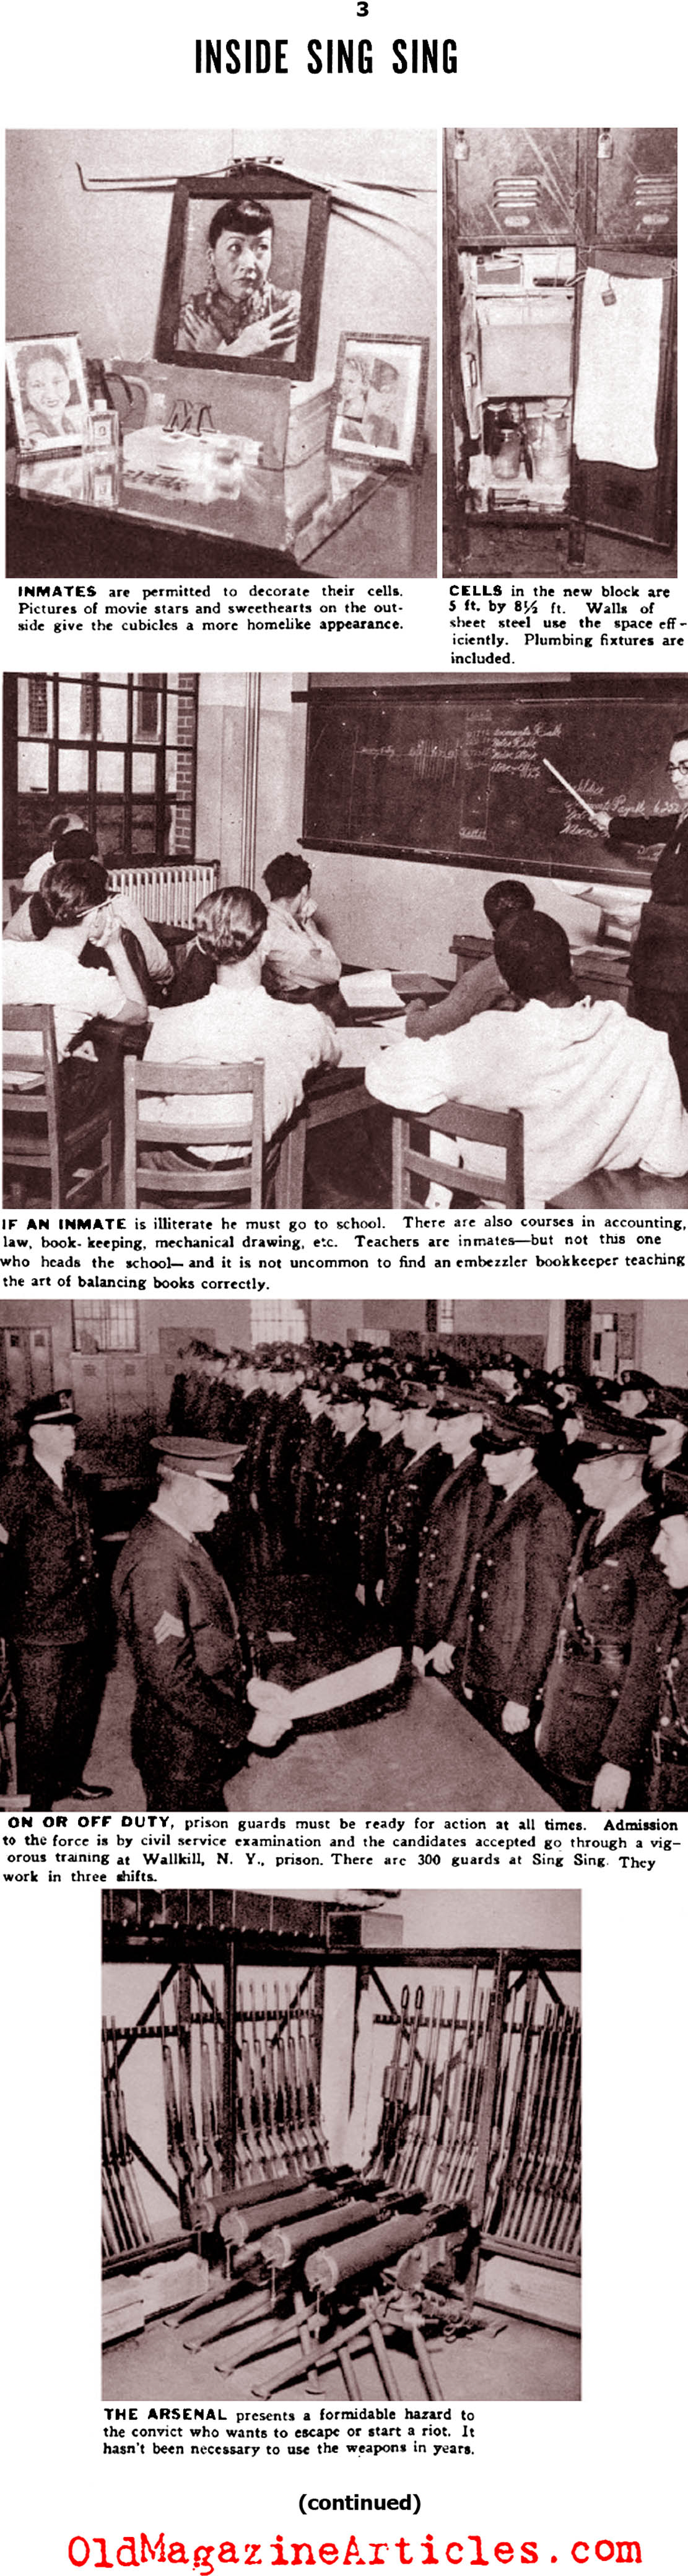 Sing Sing Prison: Home of the Bad New Yorkers (Click Magazine, 1938)